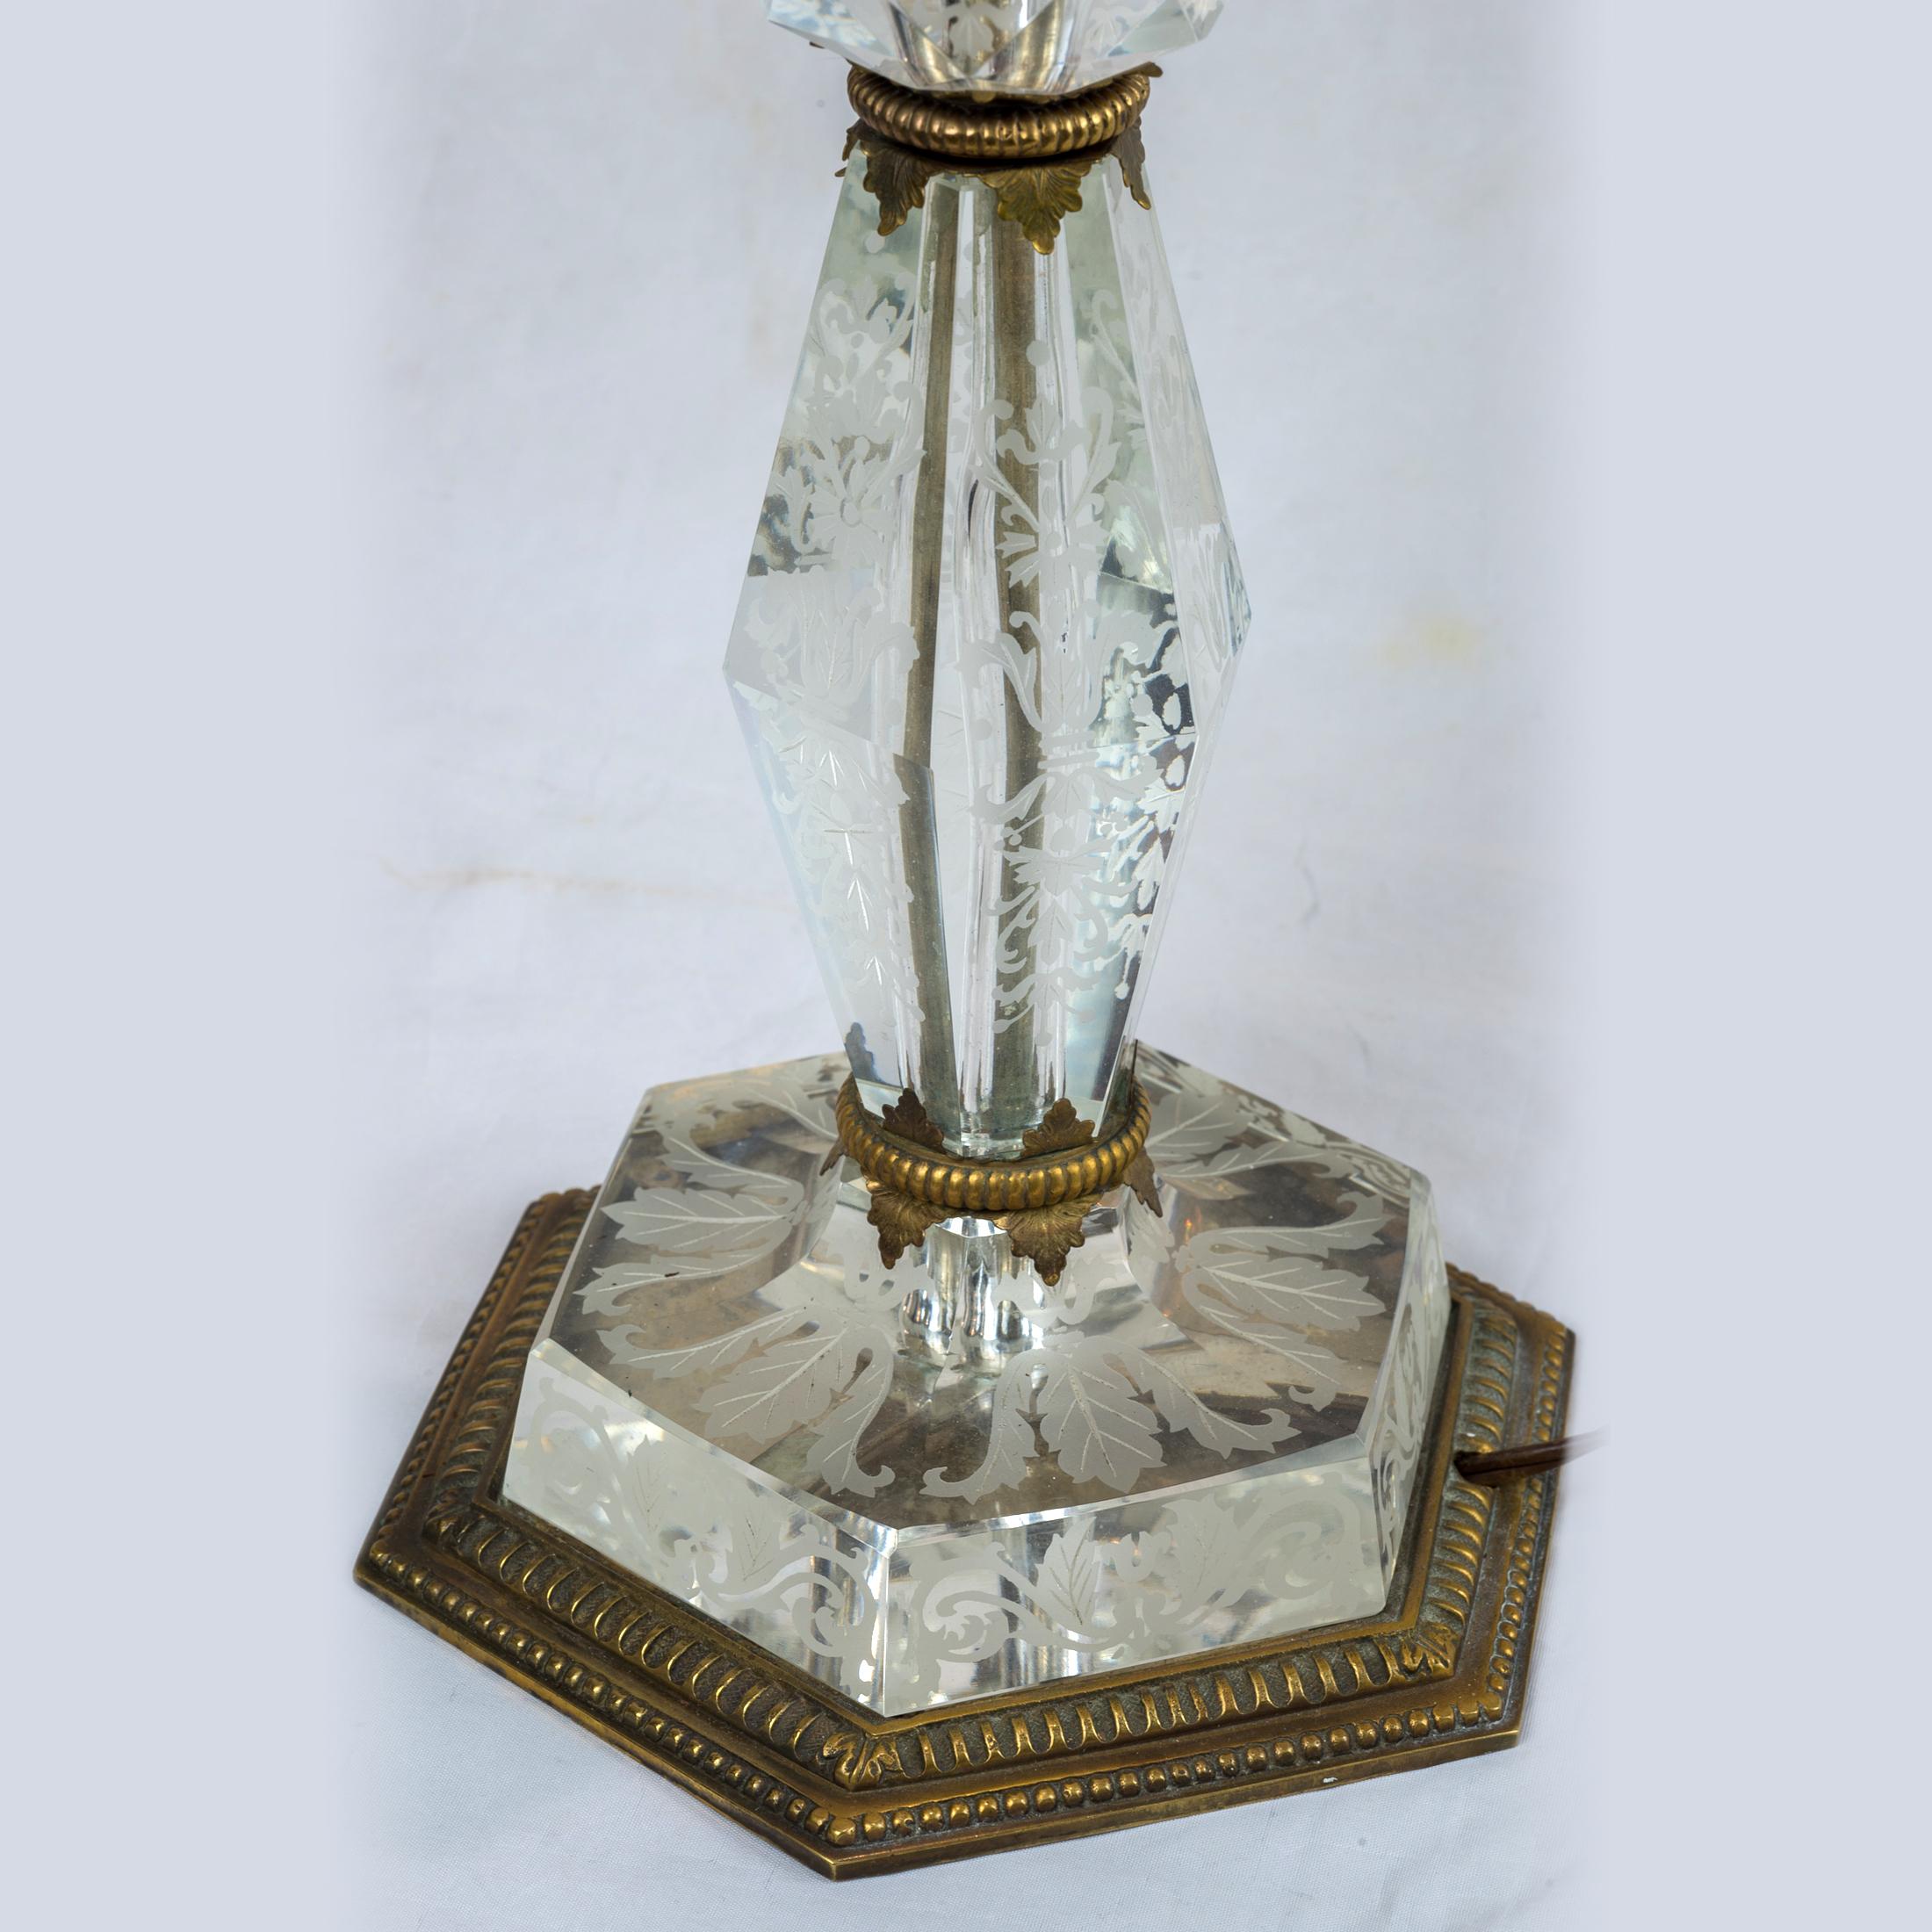 19th Century French-Cut Glass Lamps with Etched Floral Decorations For Sale